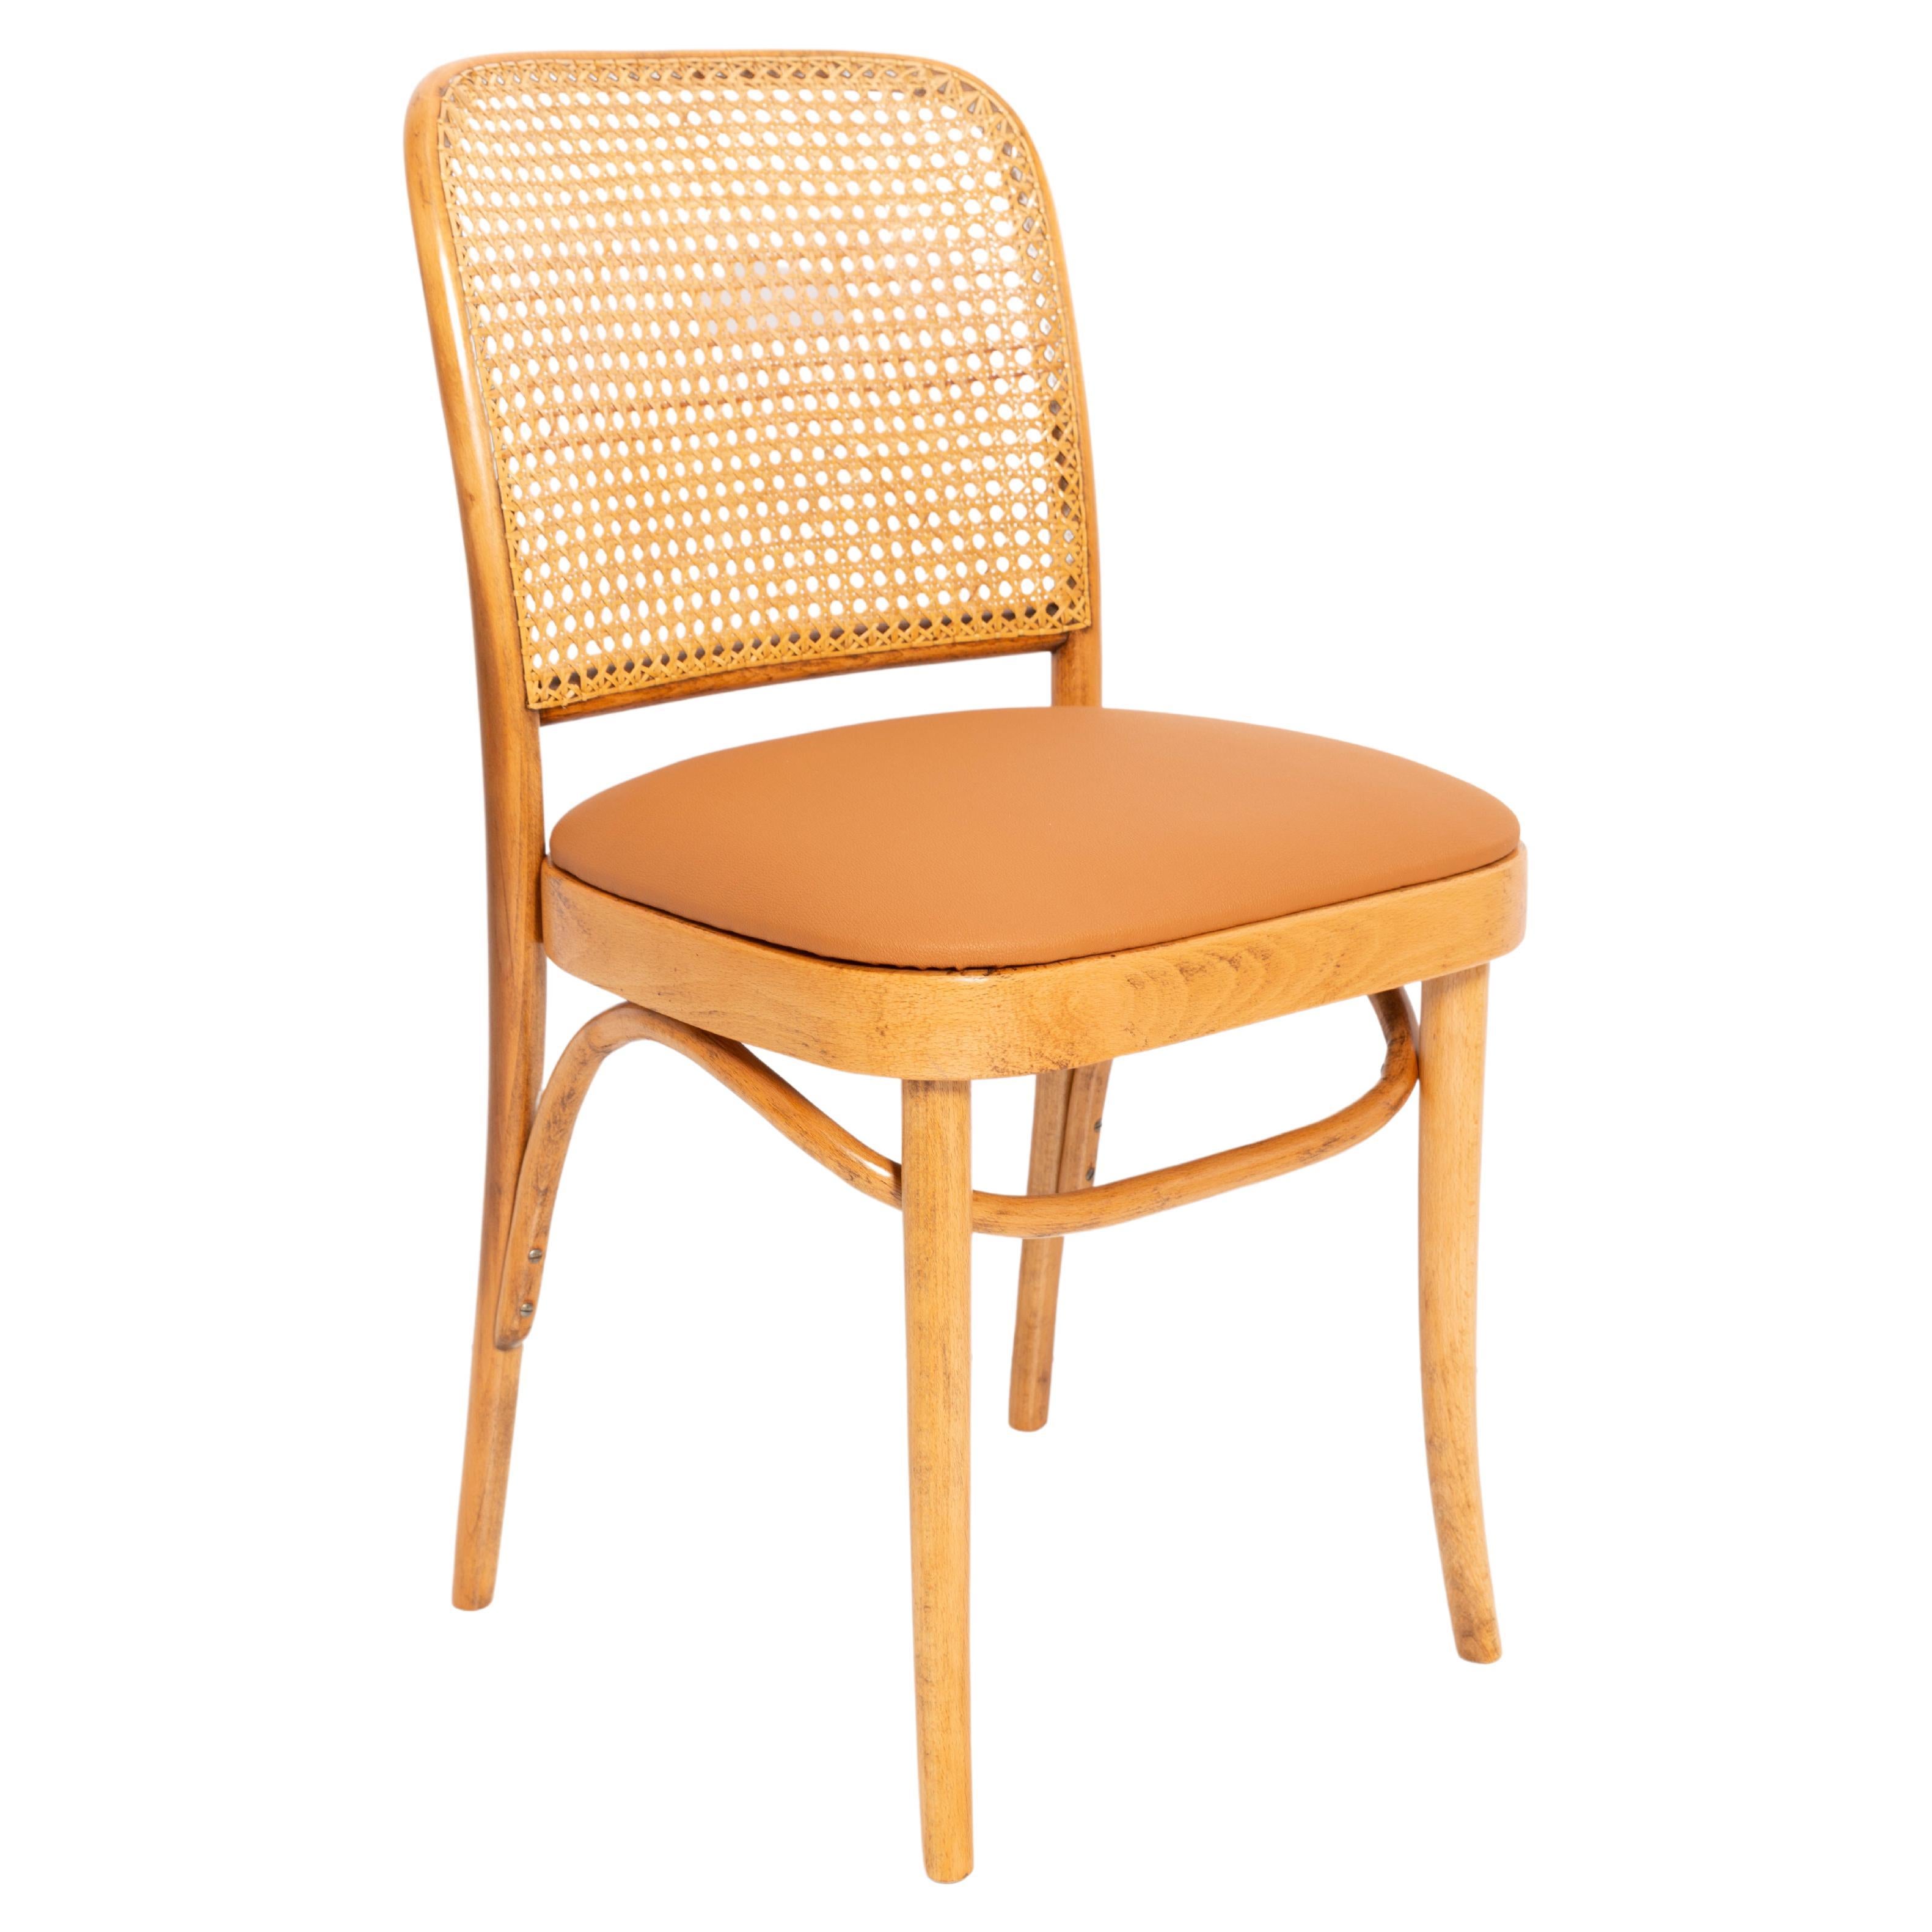 Camel Faux Leather Thonet Wood Rattan Chair, 1960s For Sale